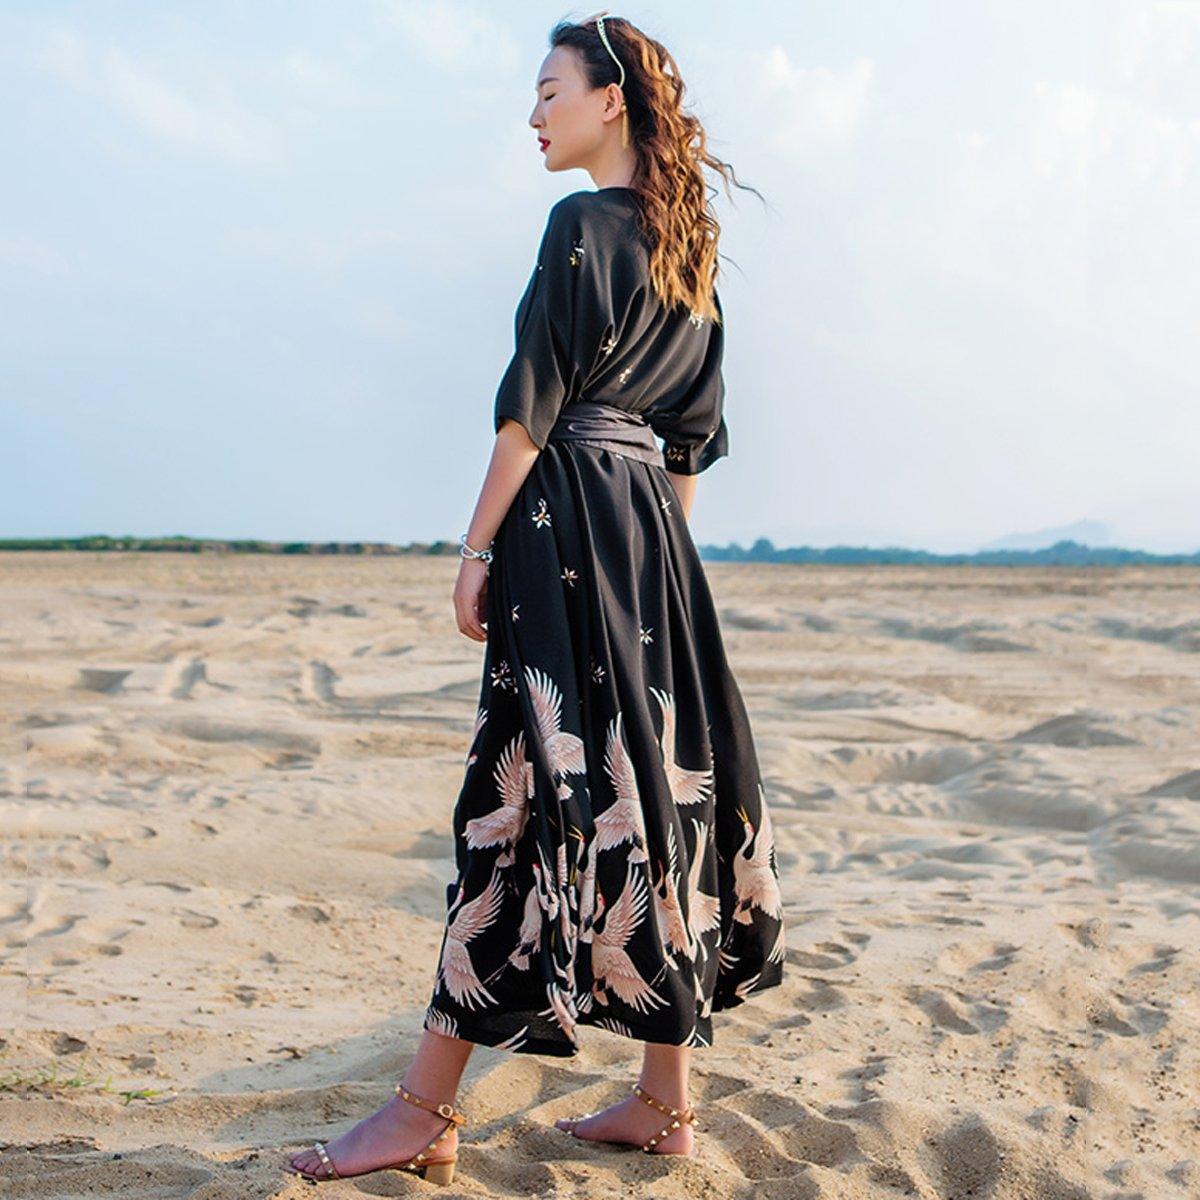 Printed Folk Style Casual Loose Maxi Short Sleeve Dress For Women 2019 May New 